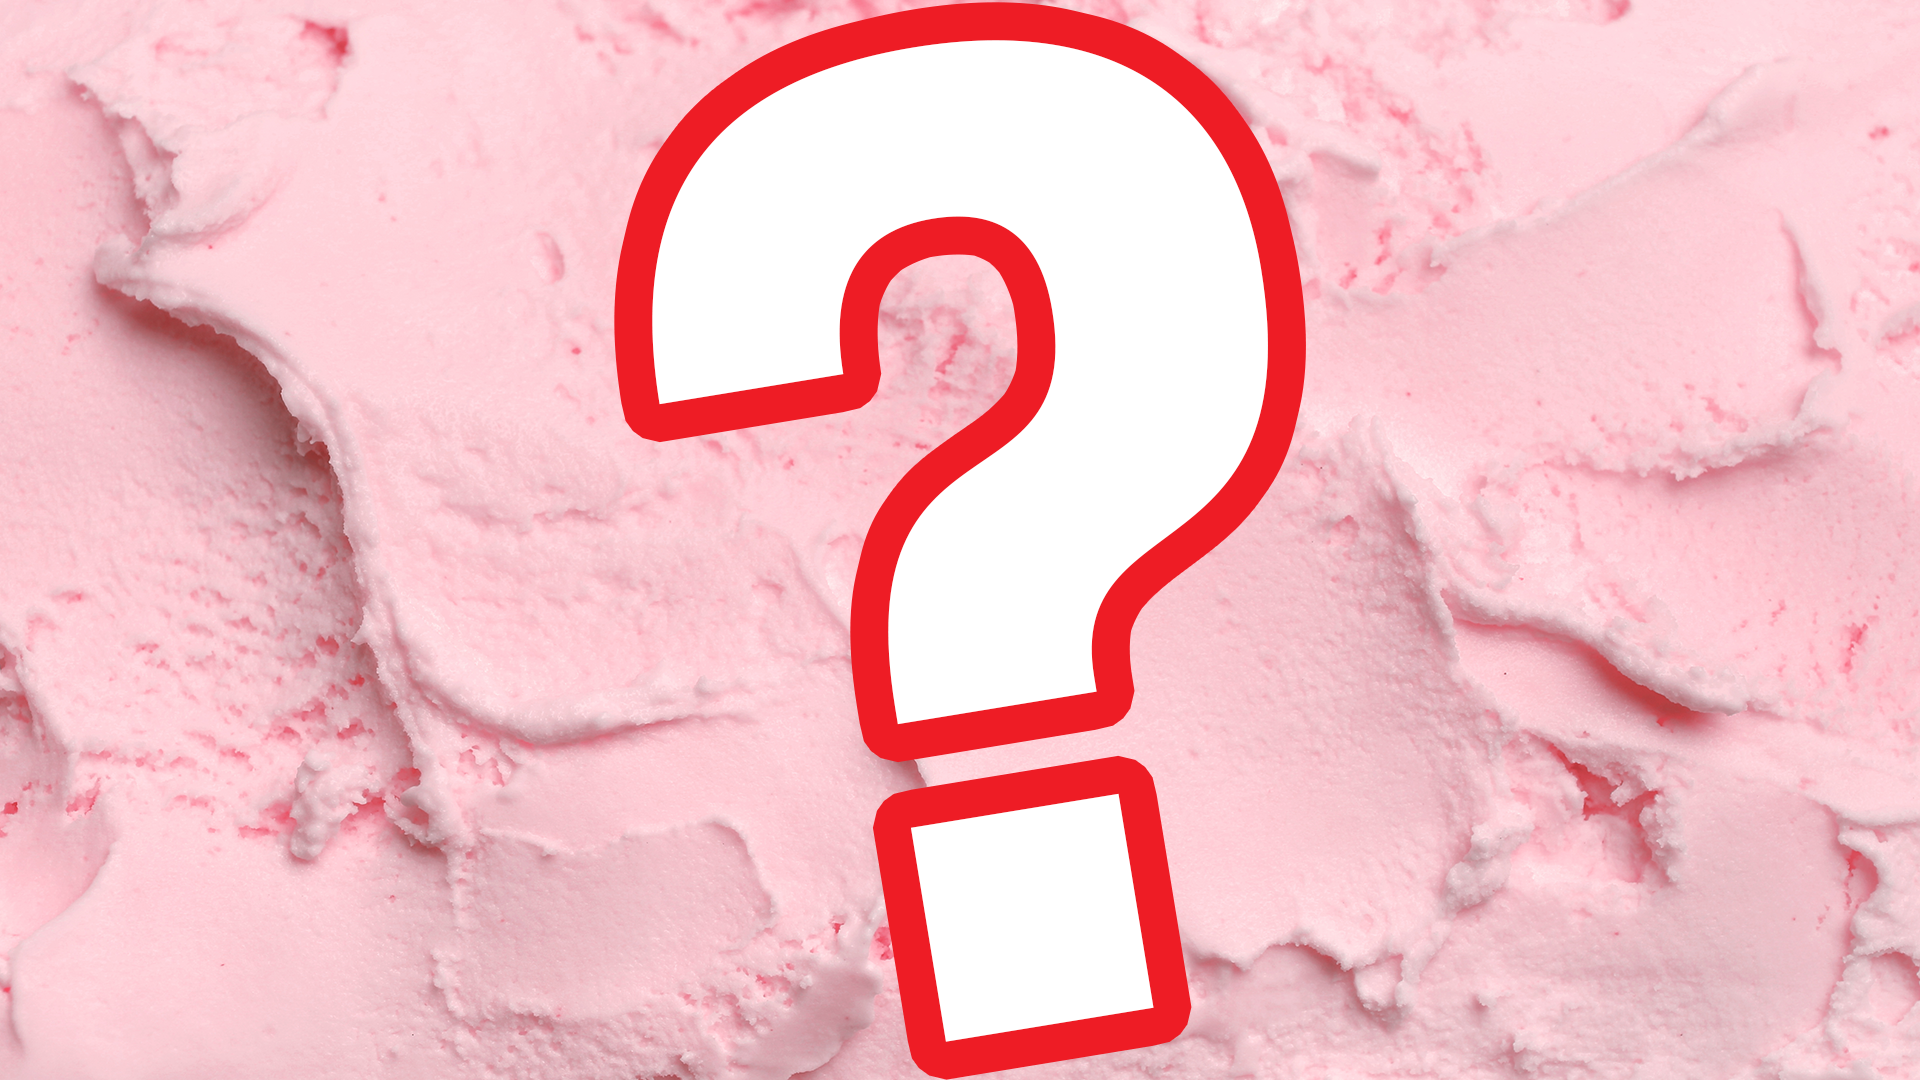 Ice cream background and question marks